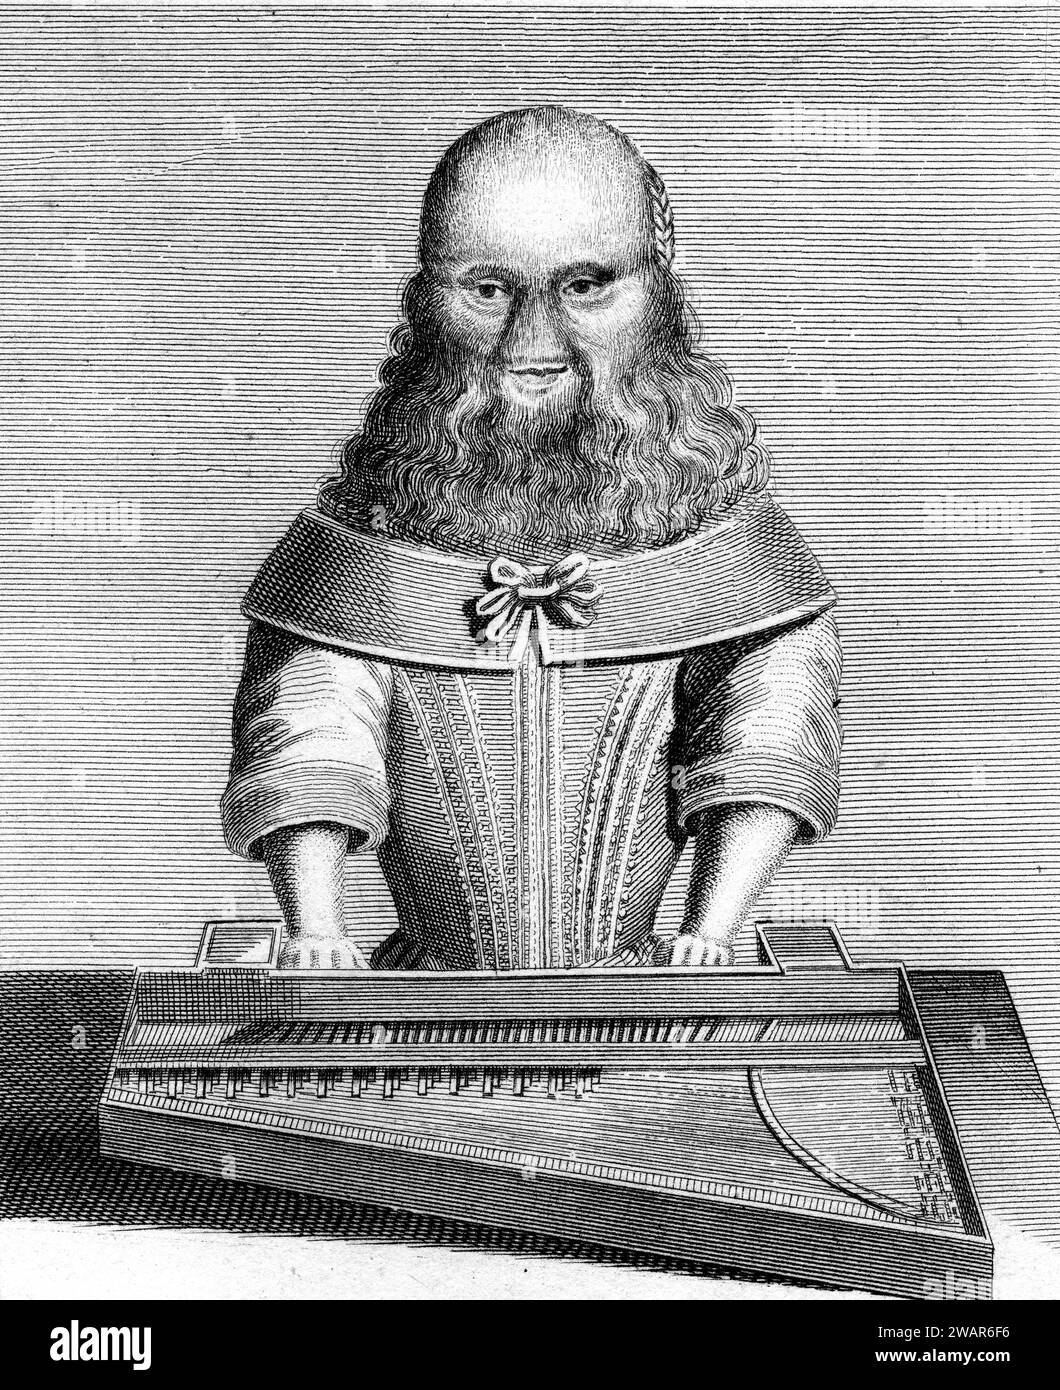 Portrait of the Berded Lady Barbara van Beck (1929-c1668) aka Barbera Usler or Barbara Urselin, c17th hairy-faced, bearded lady playing a harpsichord. Vintage or Historic Illustration or Engraving 1790 by Caulfield) Stock Photo